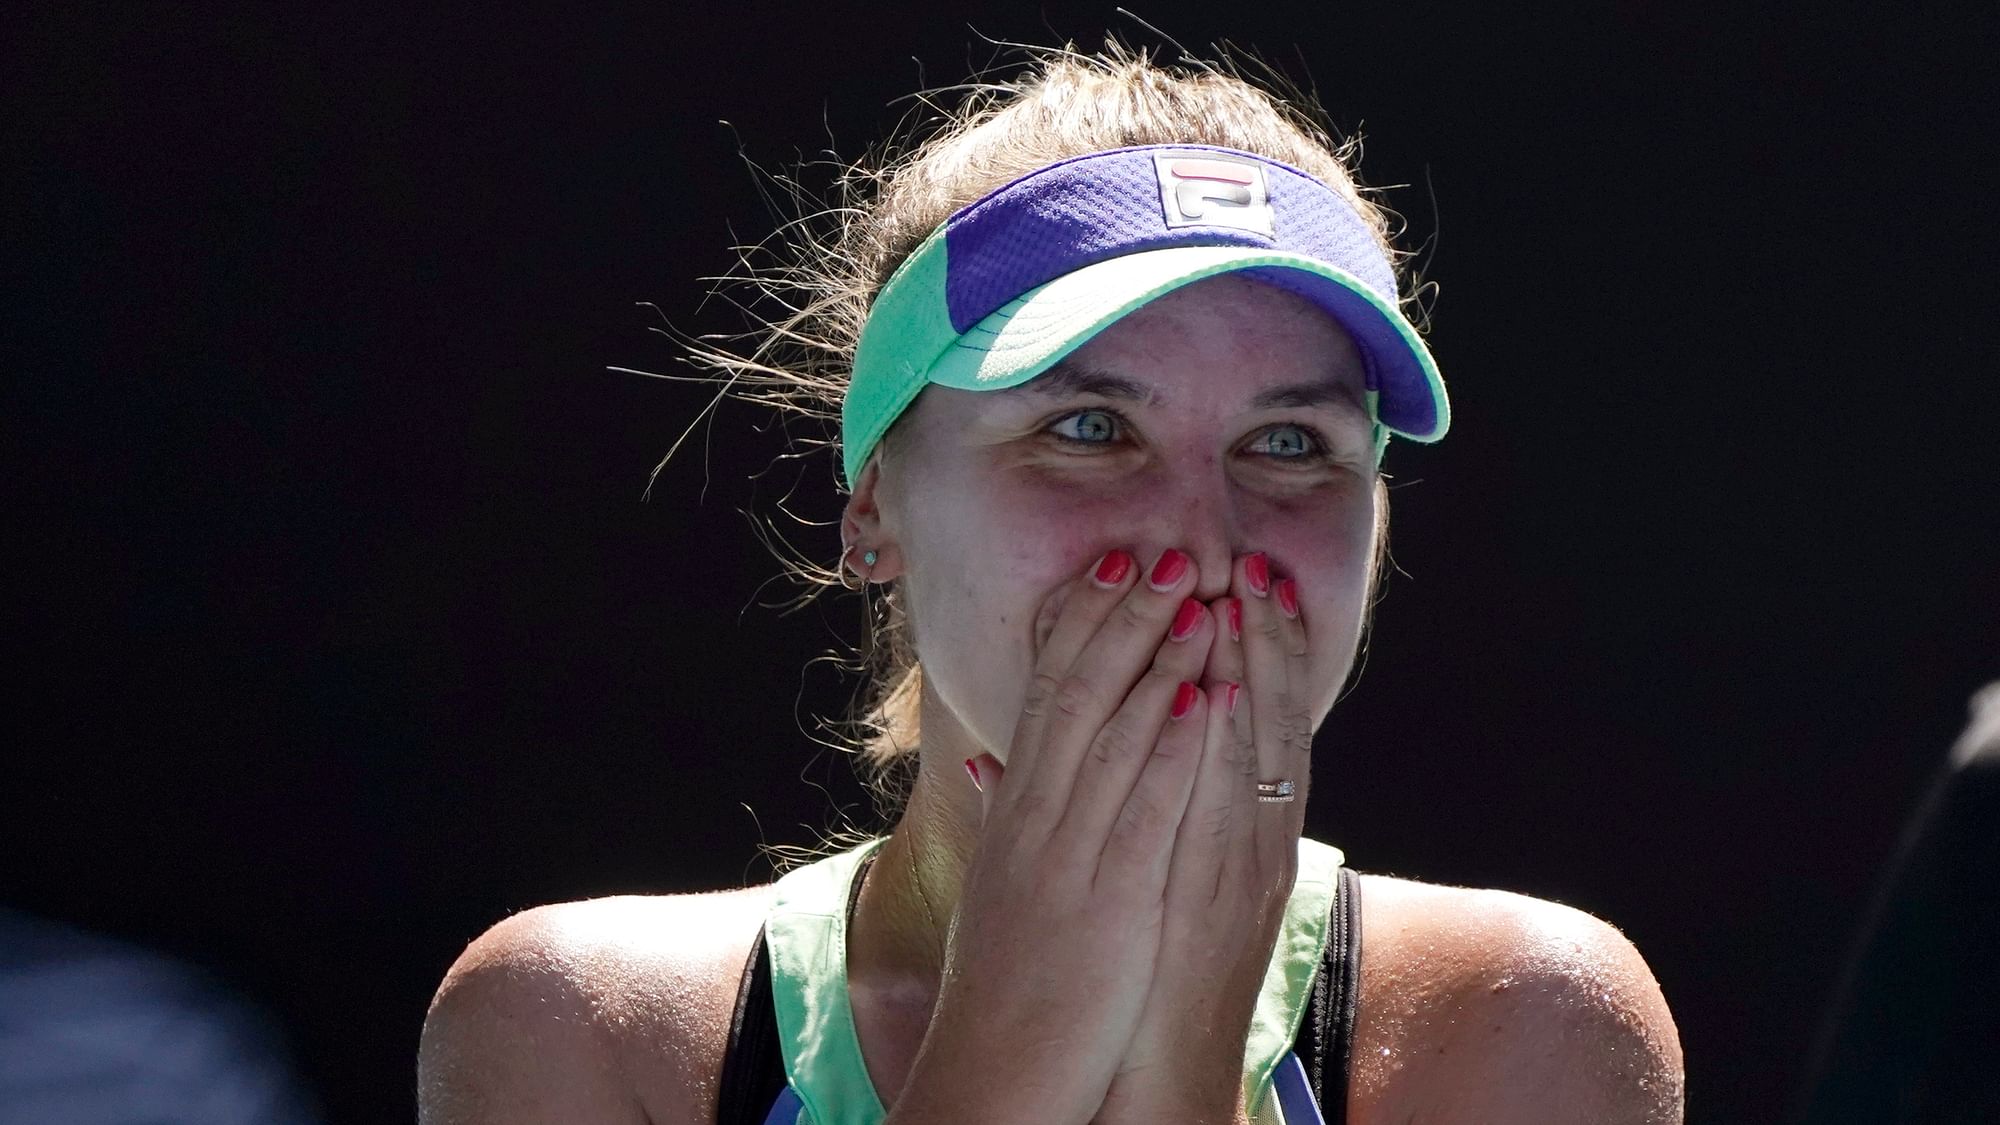 Sofia Kenin is into her first major final (Australia Open) at age 21 - beating the woman ranked No. 1, Ash Barty, to get there.